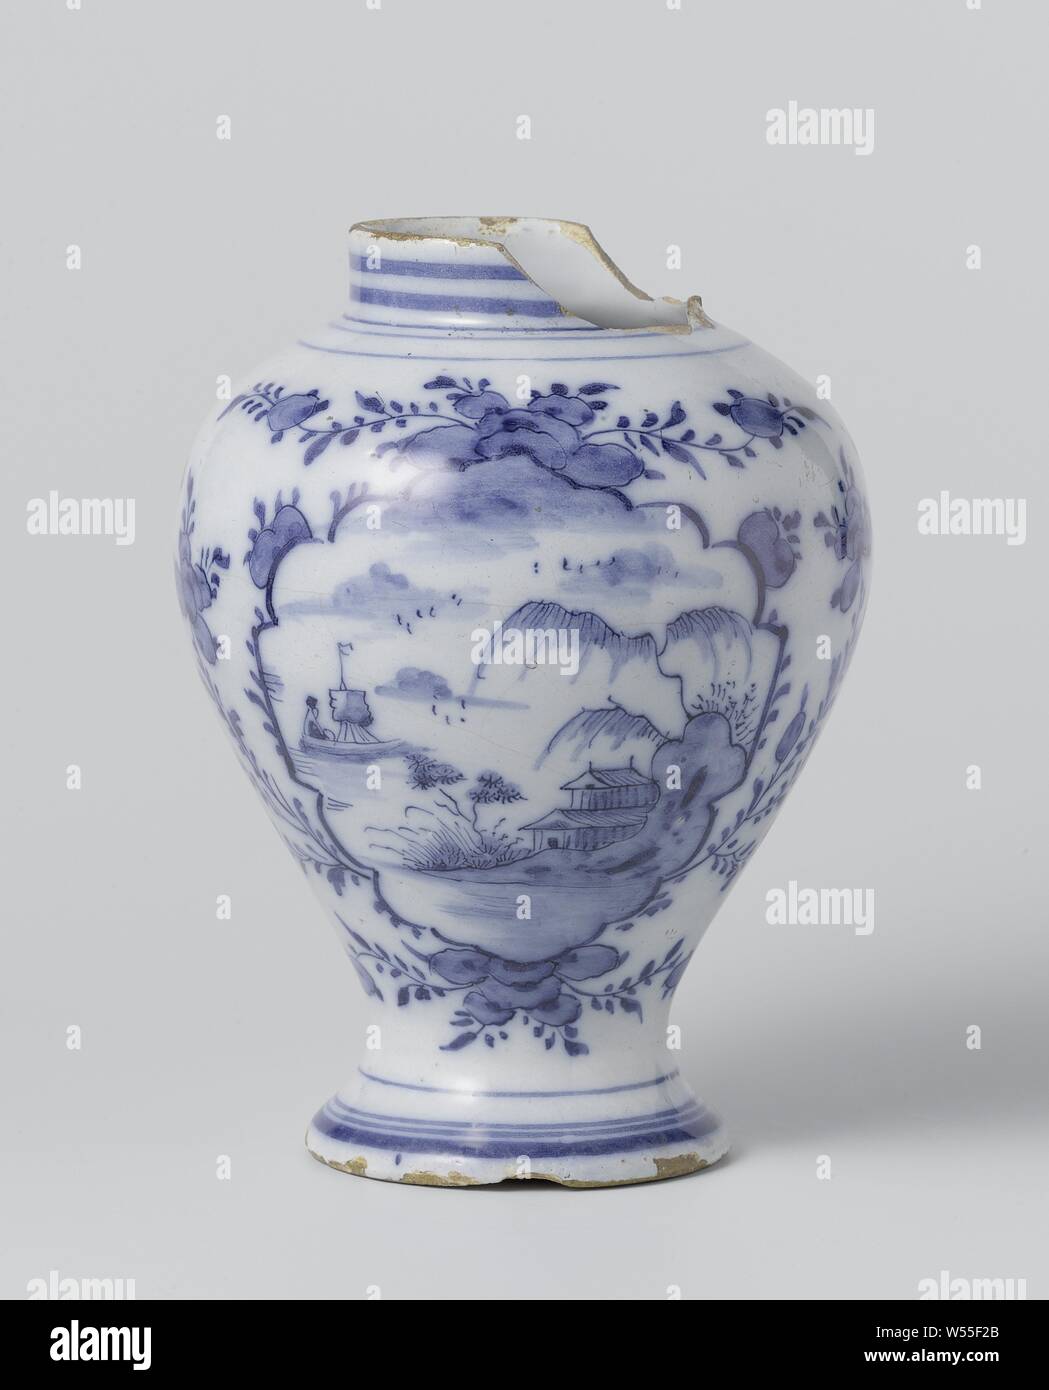 Vase, Vase of faience, painted in blue in the glaze with a landscape after Chinese example., anonymous, Delft, c. 1760 - c. 1800, h 19 cm × d 14 cm Stock Photo